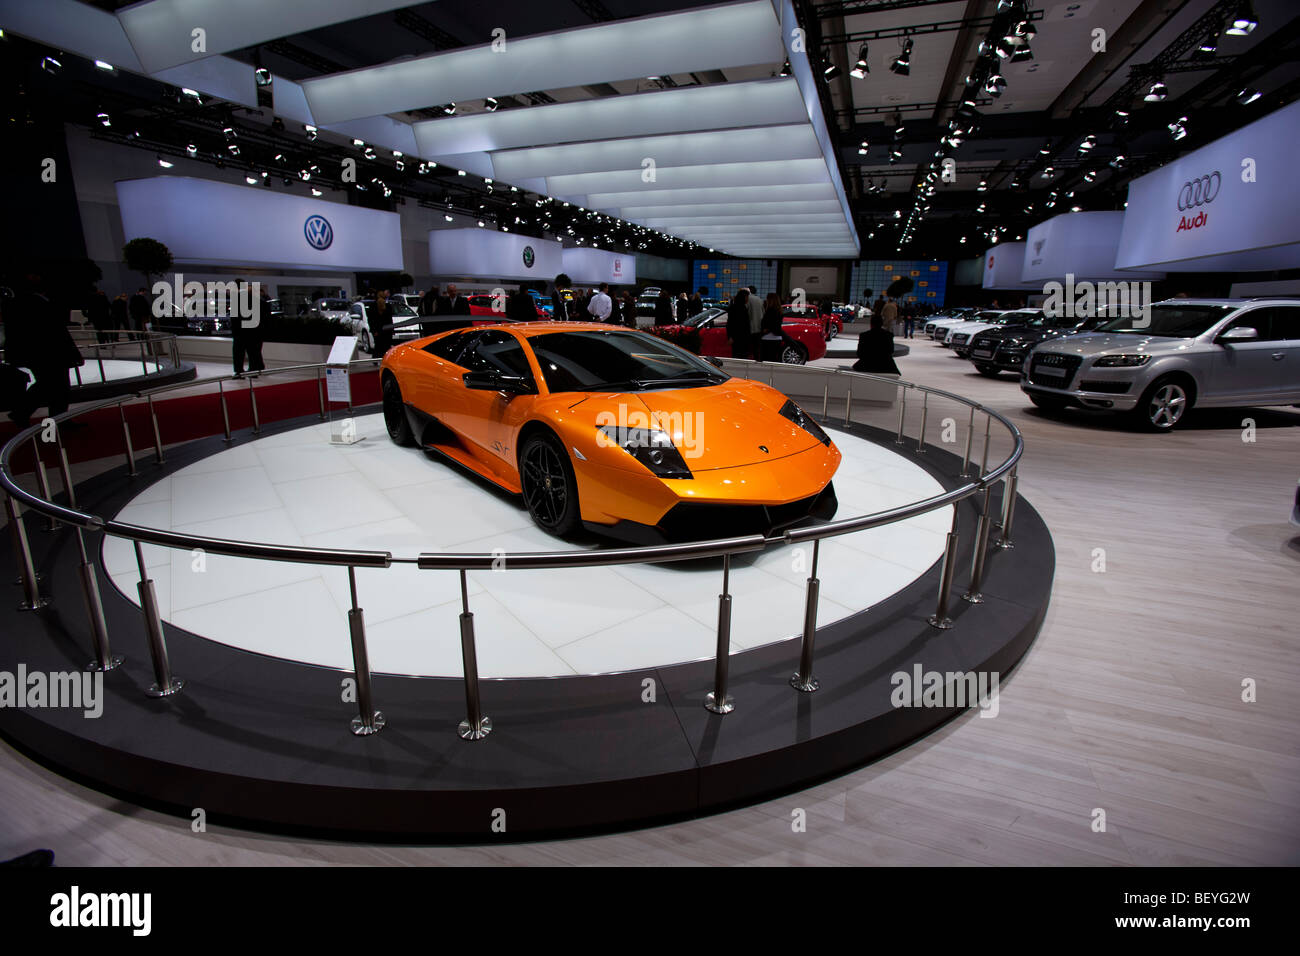 Lamborghini seen at an automobile show of the Volkswagen AG in Hamburg, Germany. Stock Photo